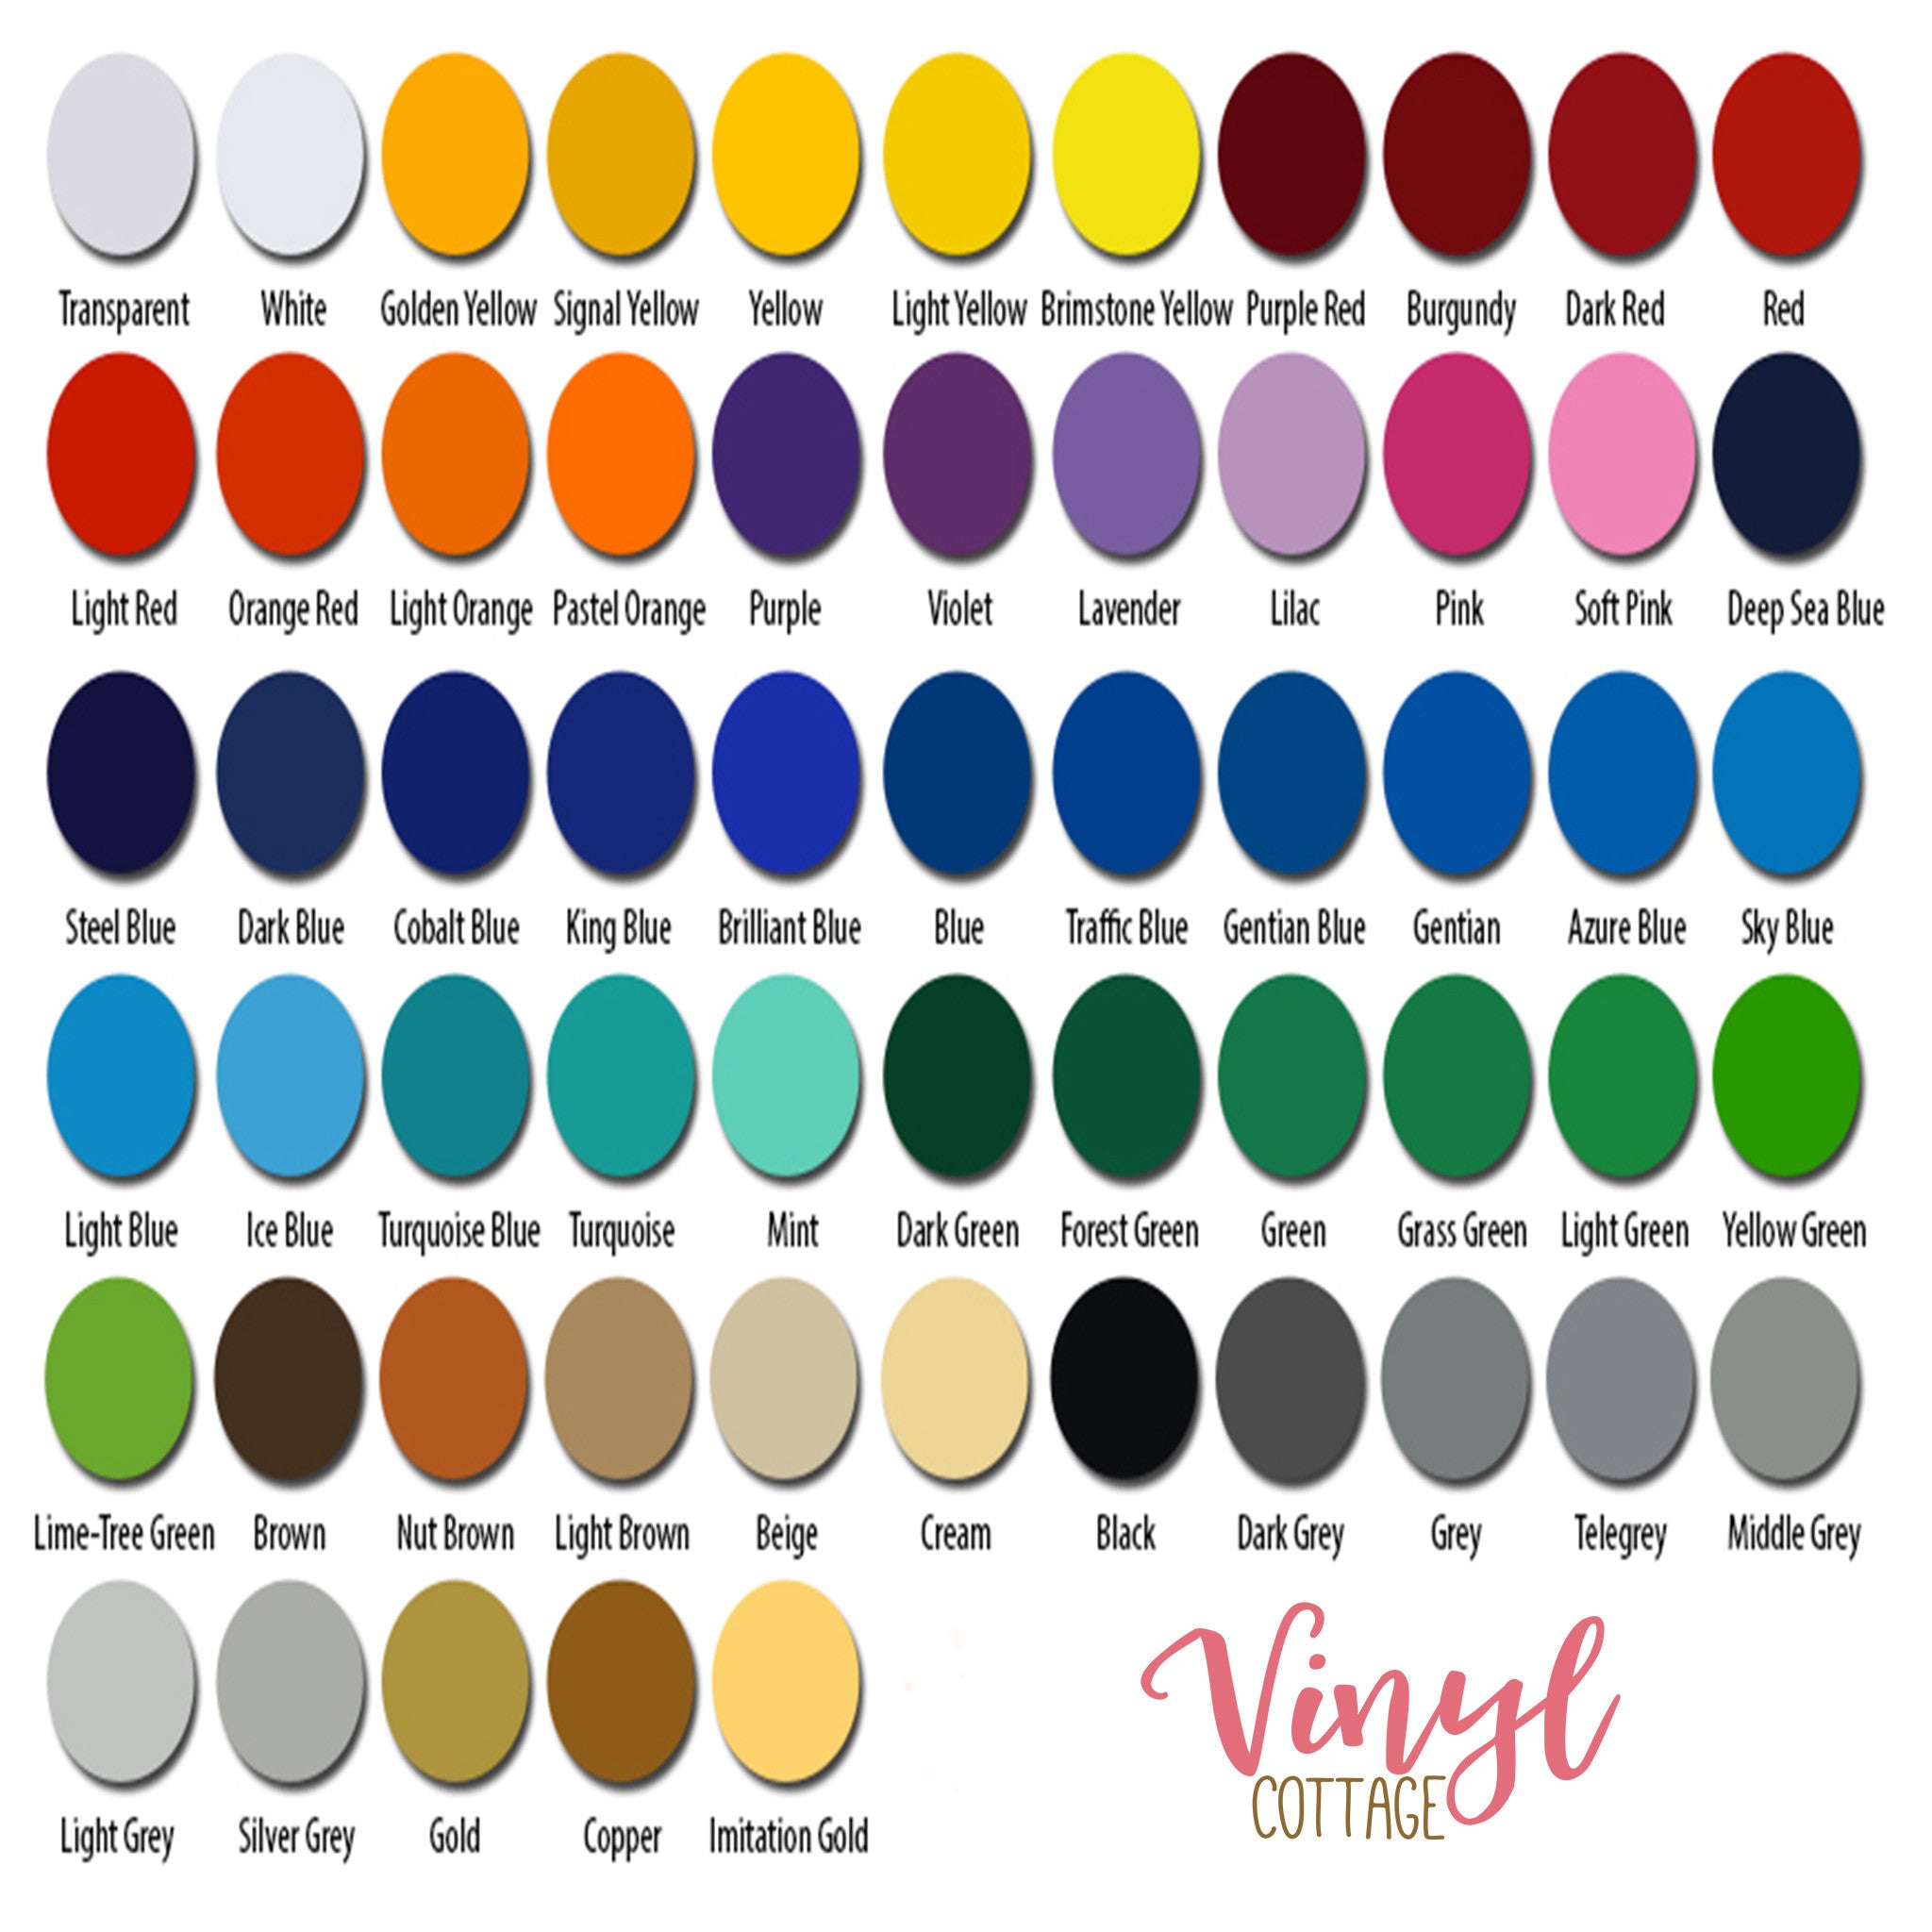 ORACAL 651 Color Chart Oracle 651 Permanent Vinyl Color Guide, 2 Ready to  Use Jpg's Fully Editable Canva Template, All Colors -  Sweden